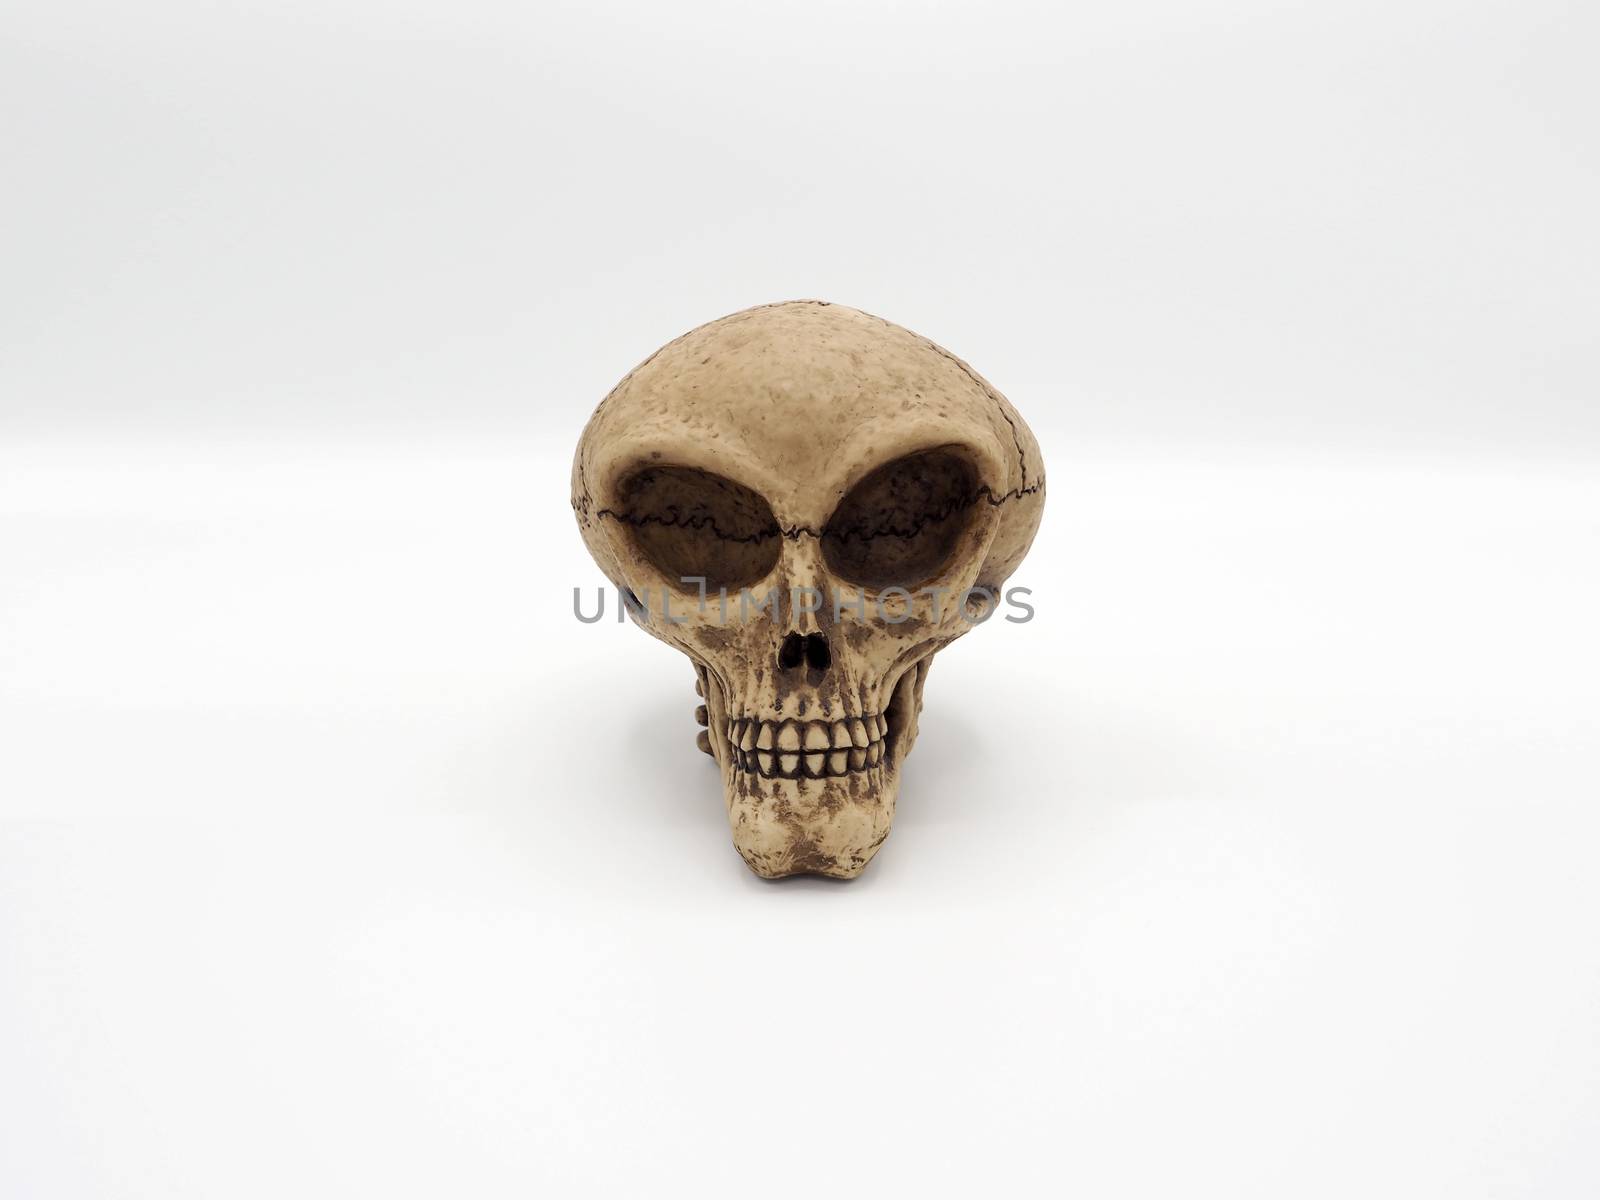 Alien skull toy model which made from plastic racin by hand  by gnepphoto